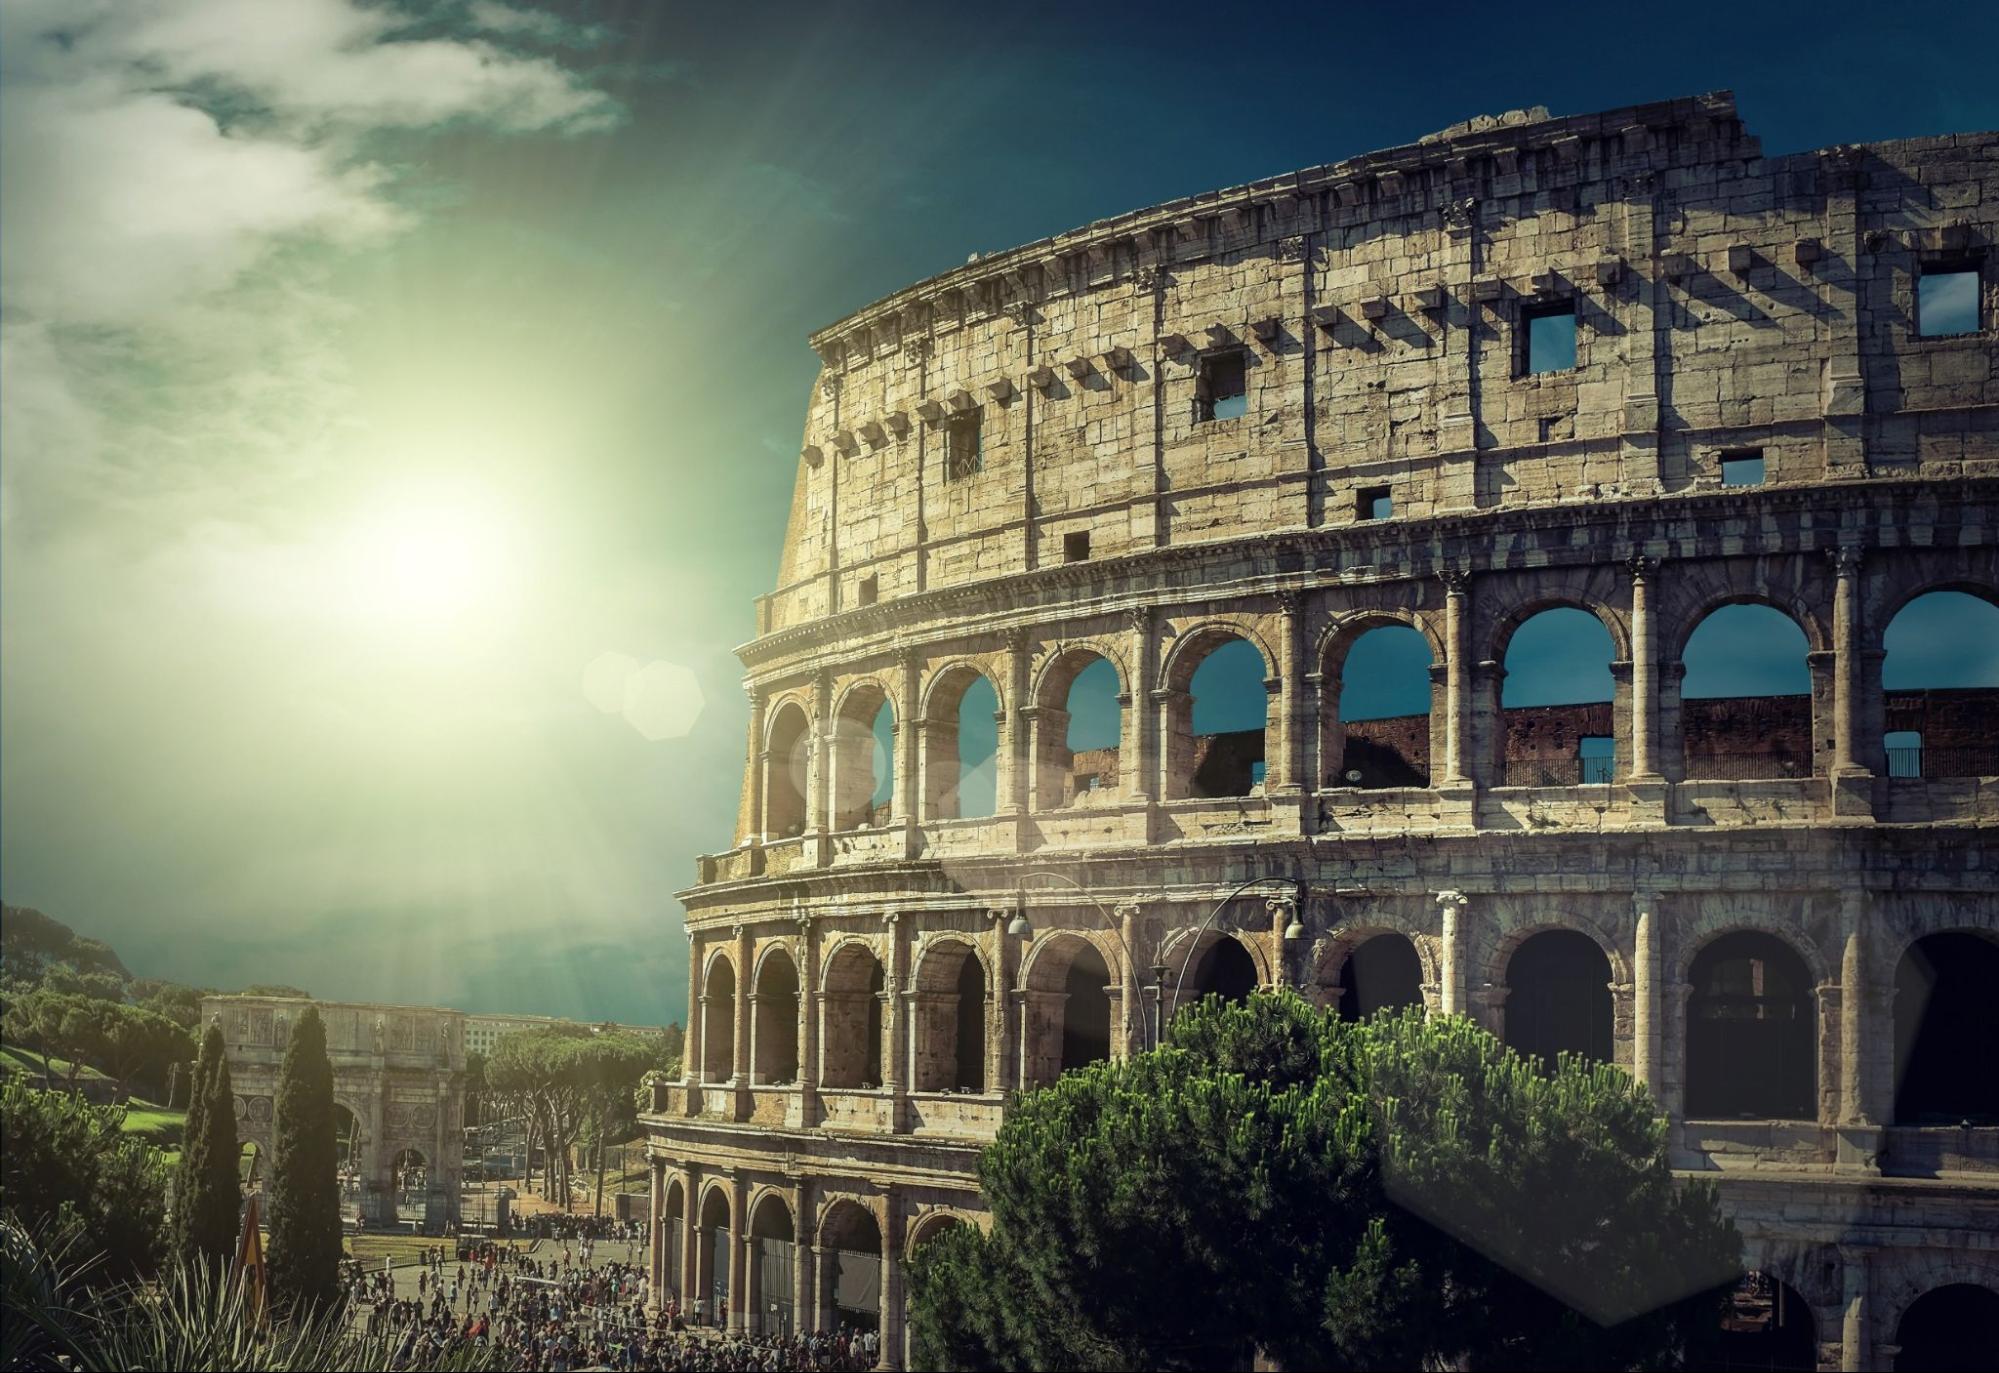 One of the most popular travel place in world - Roman Coliseum